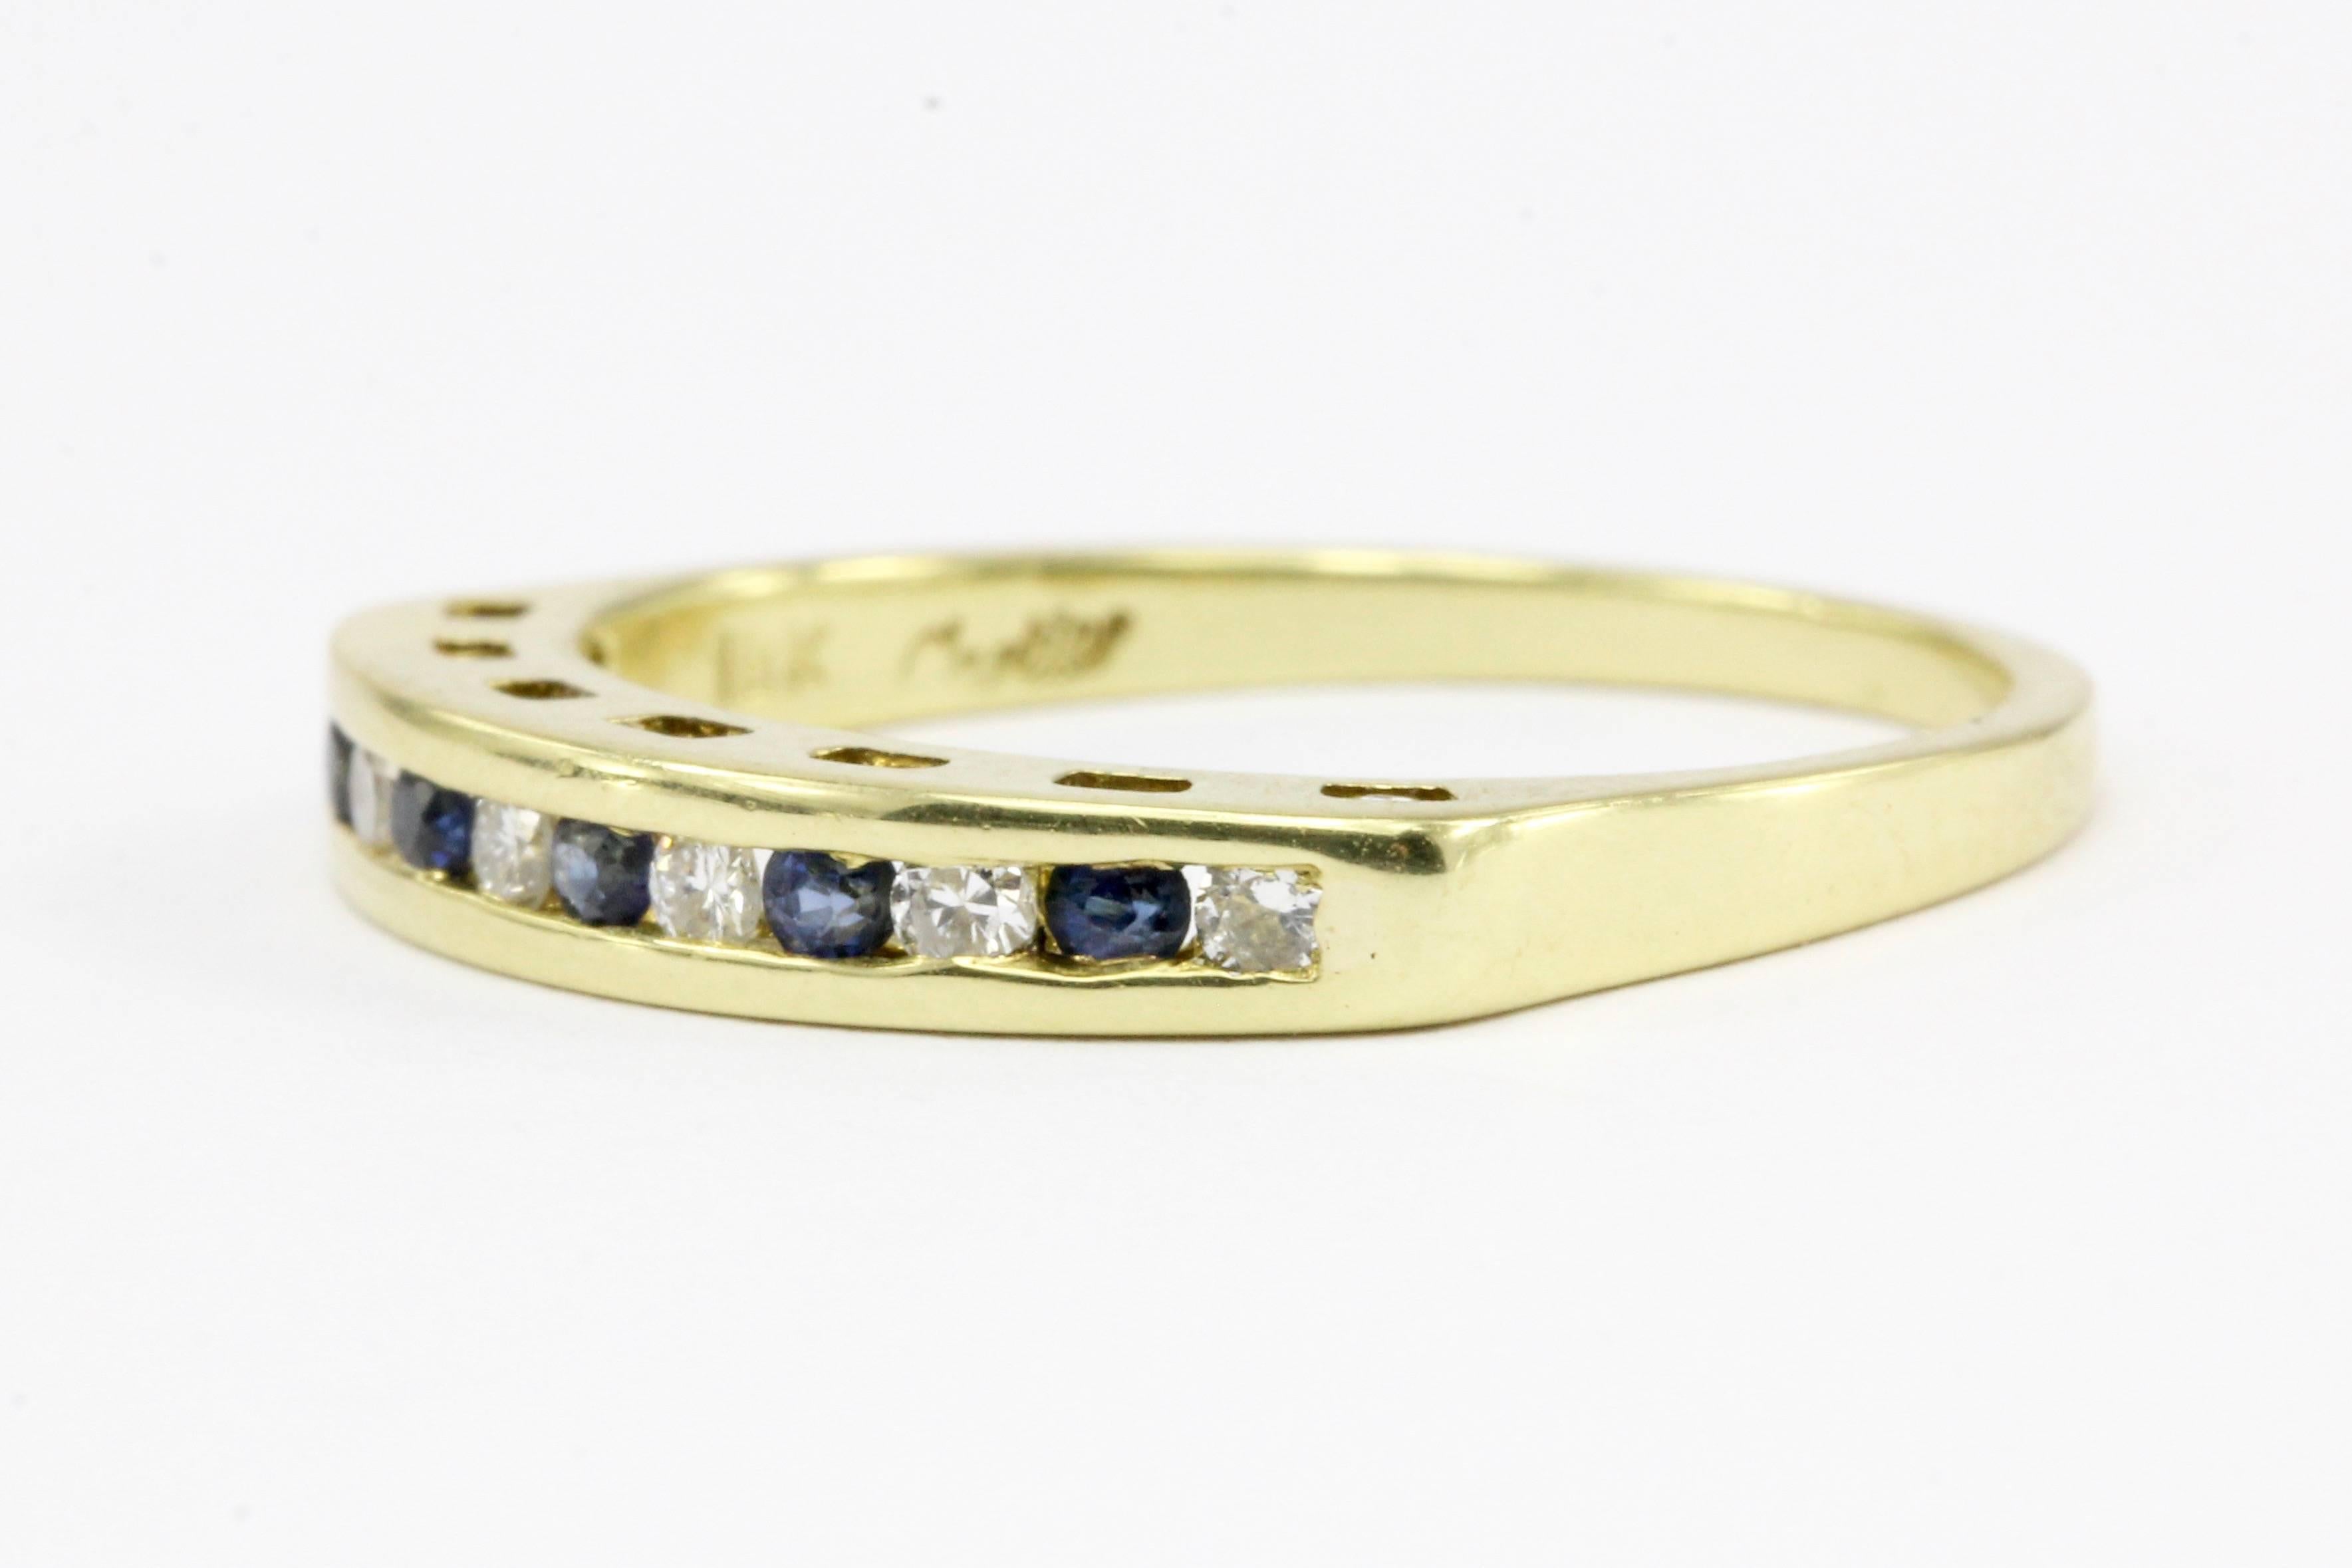 Era: Vintage 

Composition: 18K Yellow Gold 

Primary Stone: Diamonds

Primary Stone Color: G

Primary Stone Clarity: Vs1

Primary Stone Carat: .12 CTW (6 stones)

Secondary Stone: Natural heated sapphire

Secondary Stone Carat: .15 CTW (5